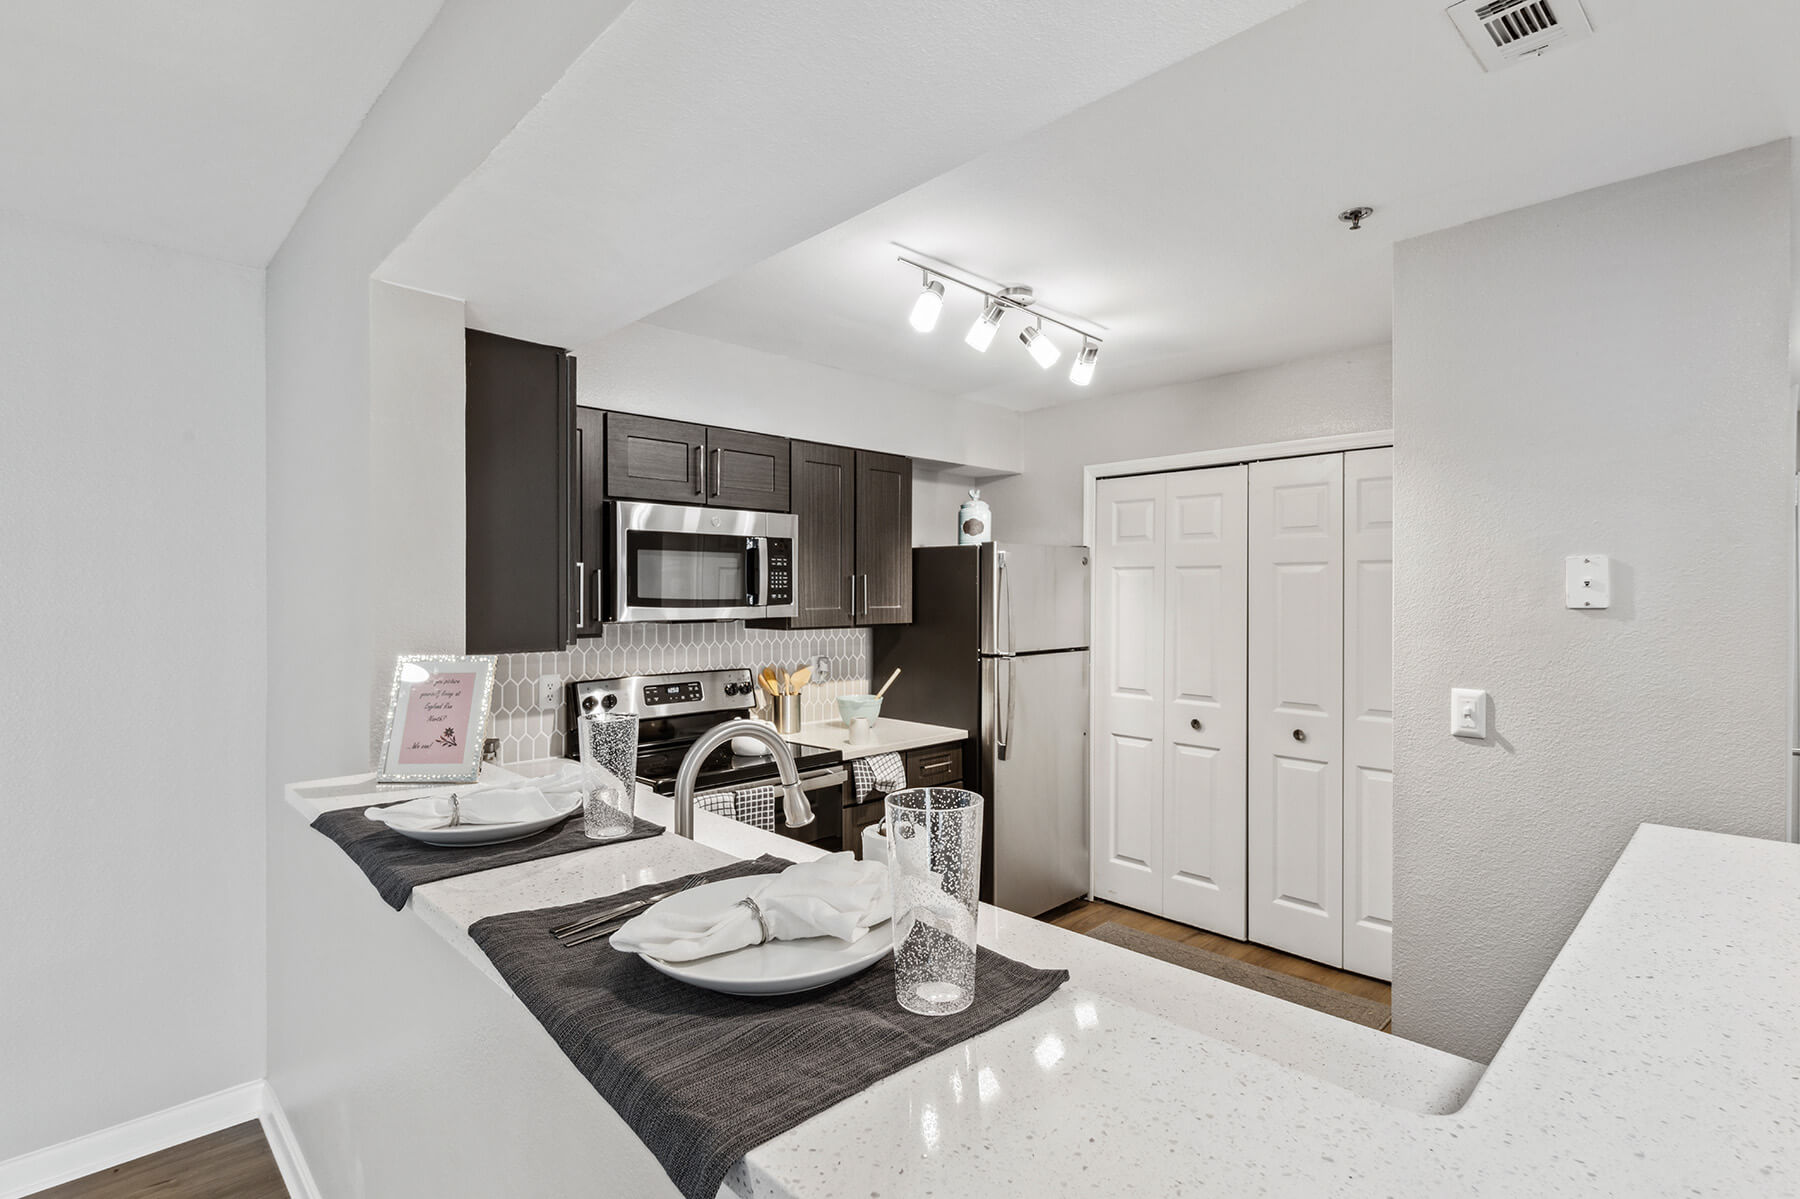 A white kitchen with dark cabinets at the England Run North Apartments in Fredericksburg, Virginia.